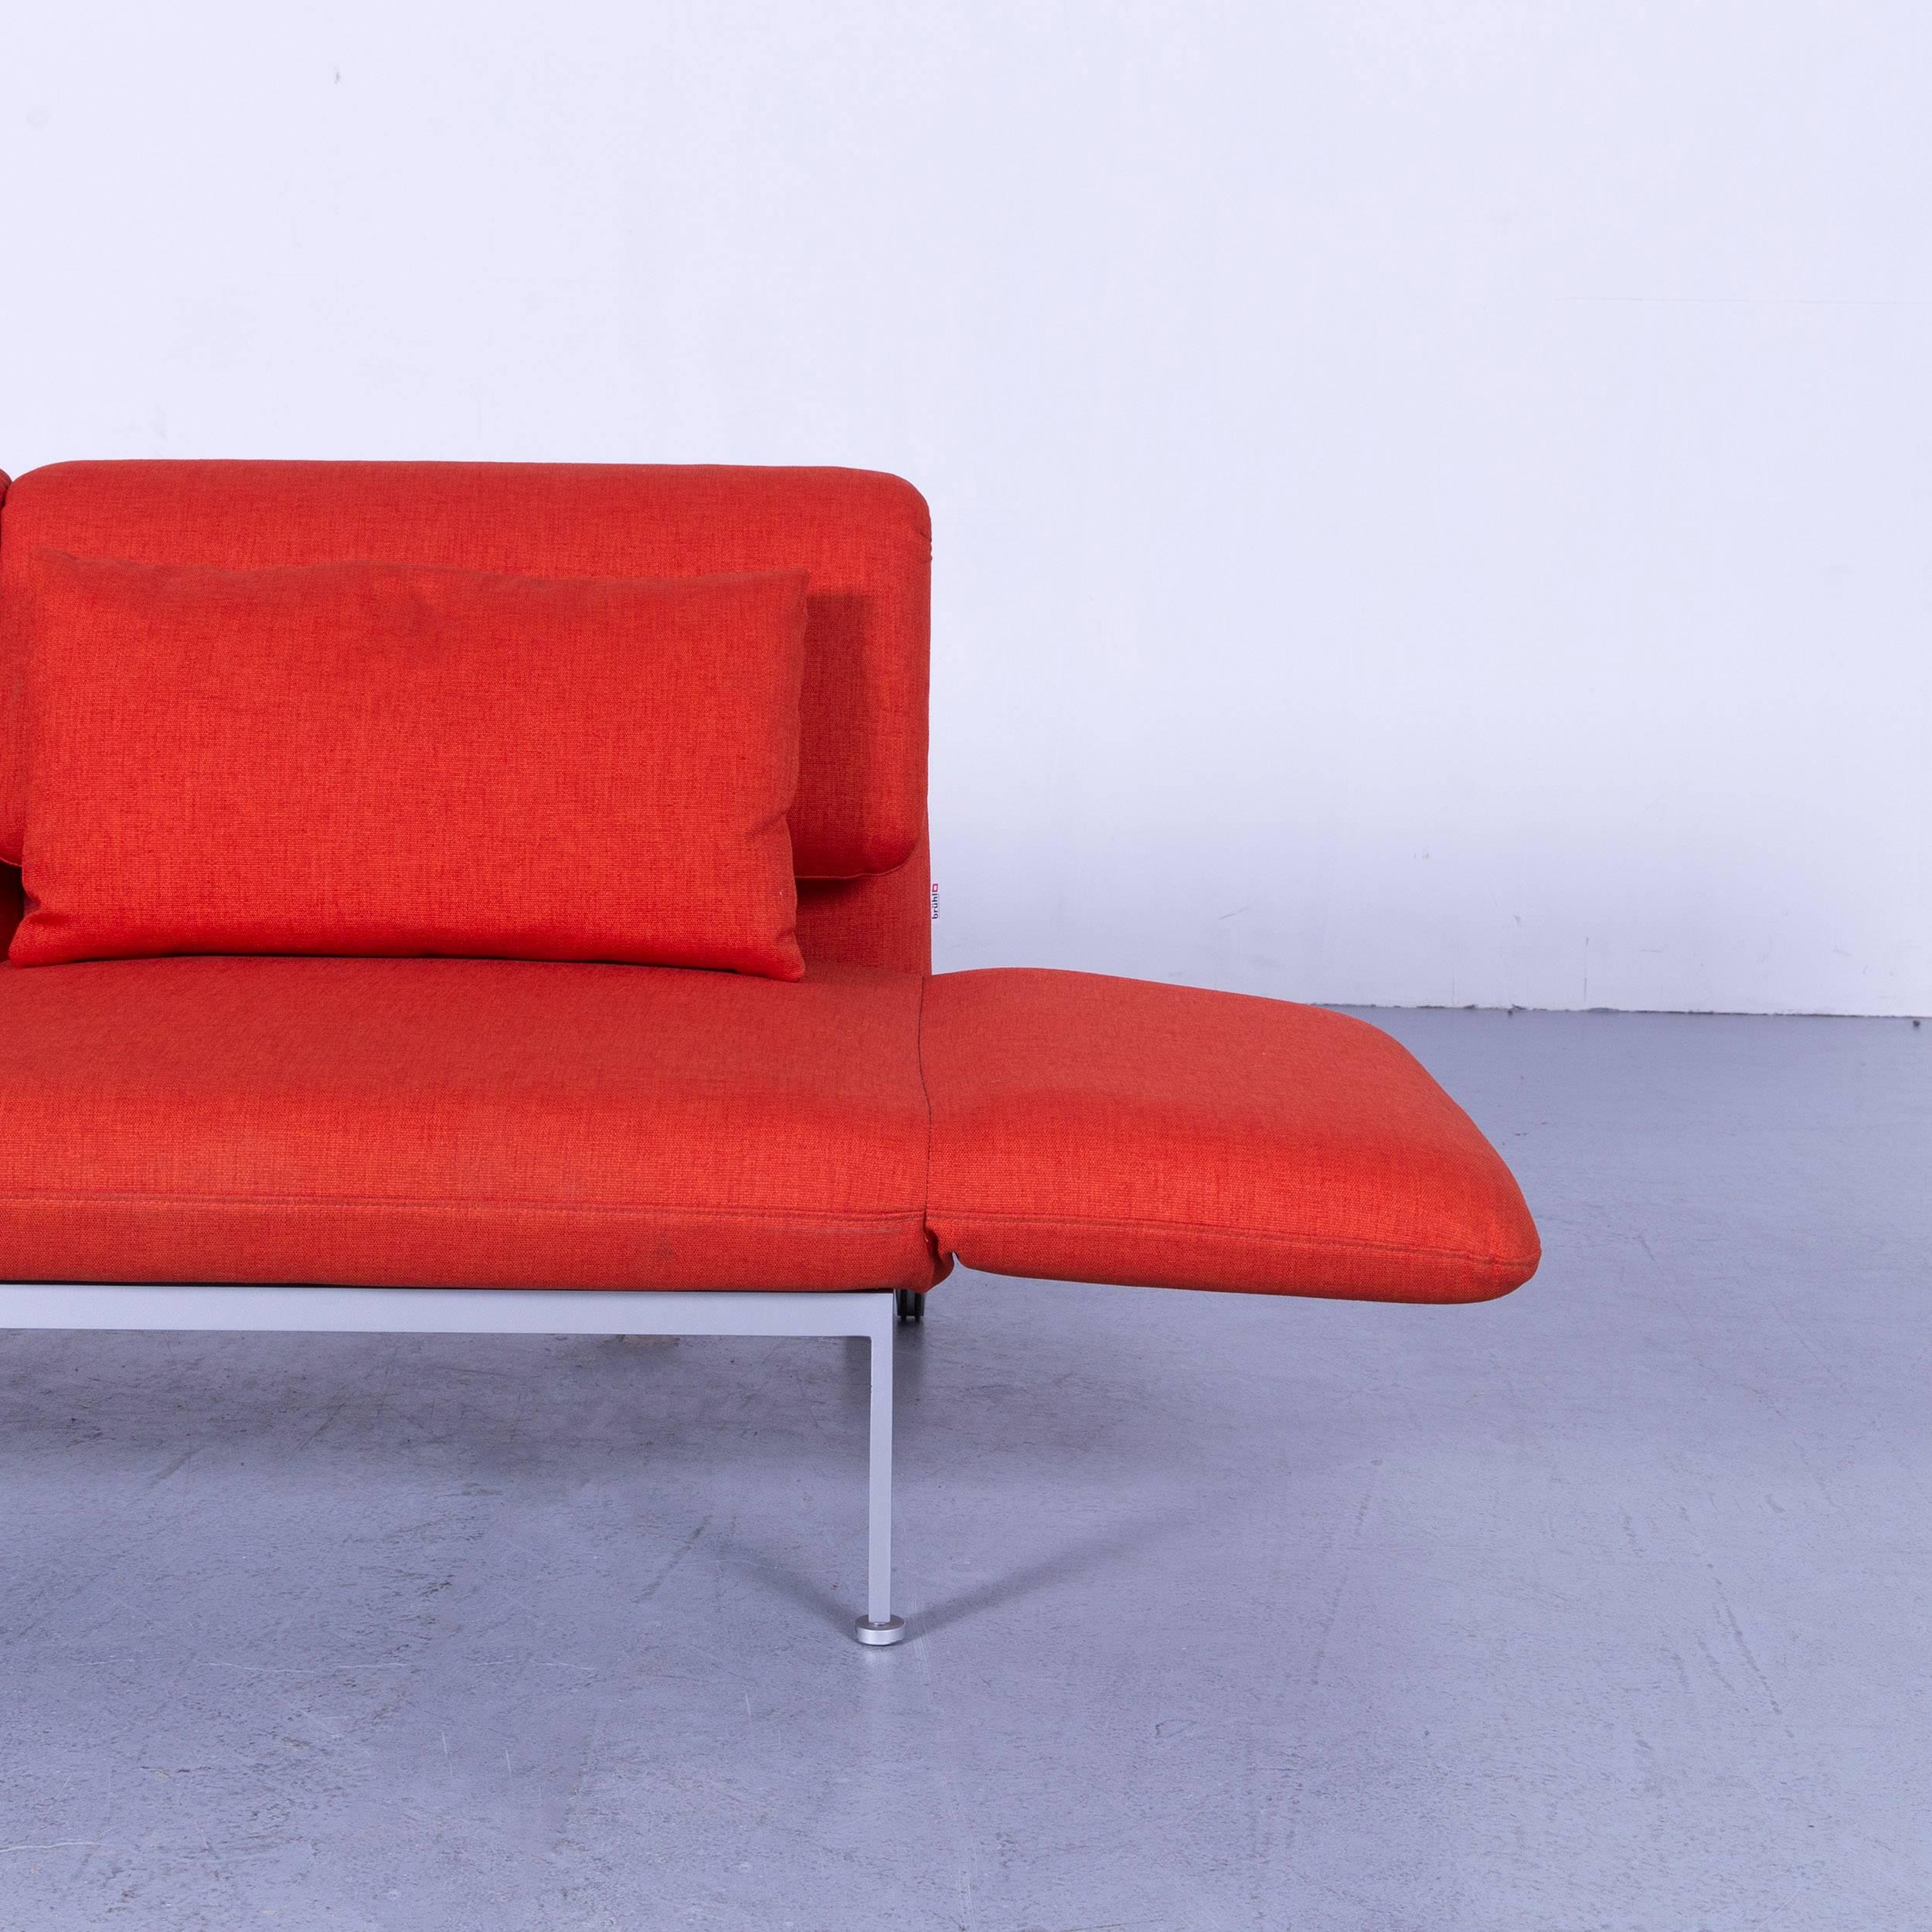 Brühl & Sippold Roro Designer Bed Sofa in Red Orange Fabric with Great Functions For Sale 1